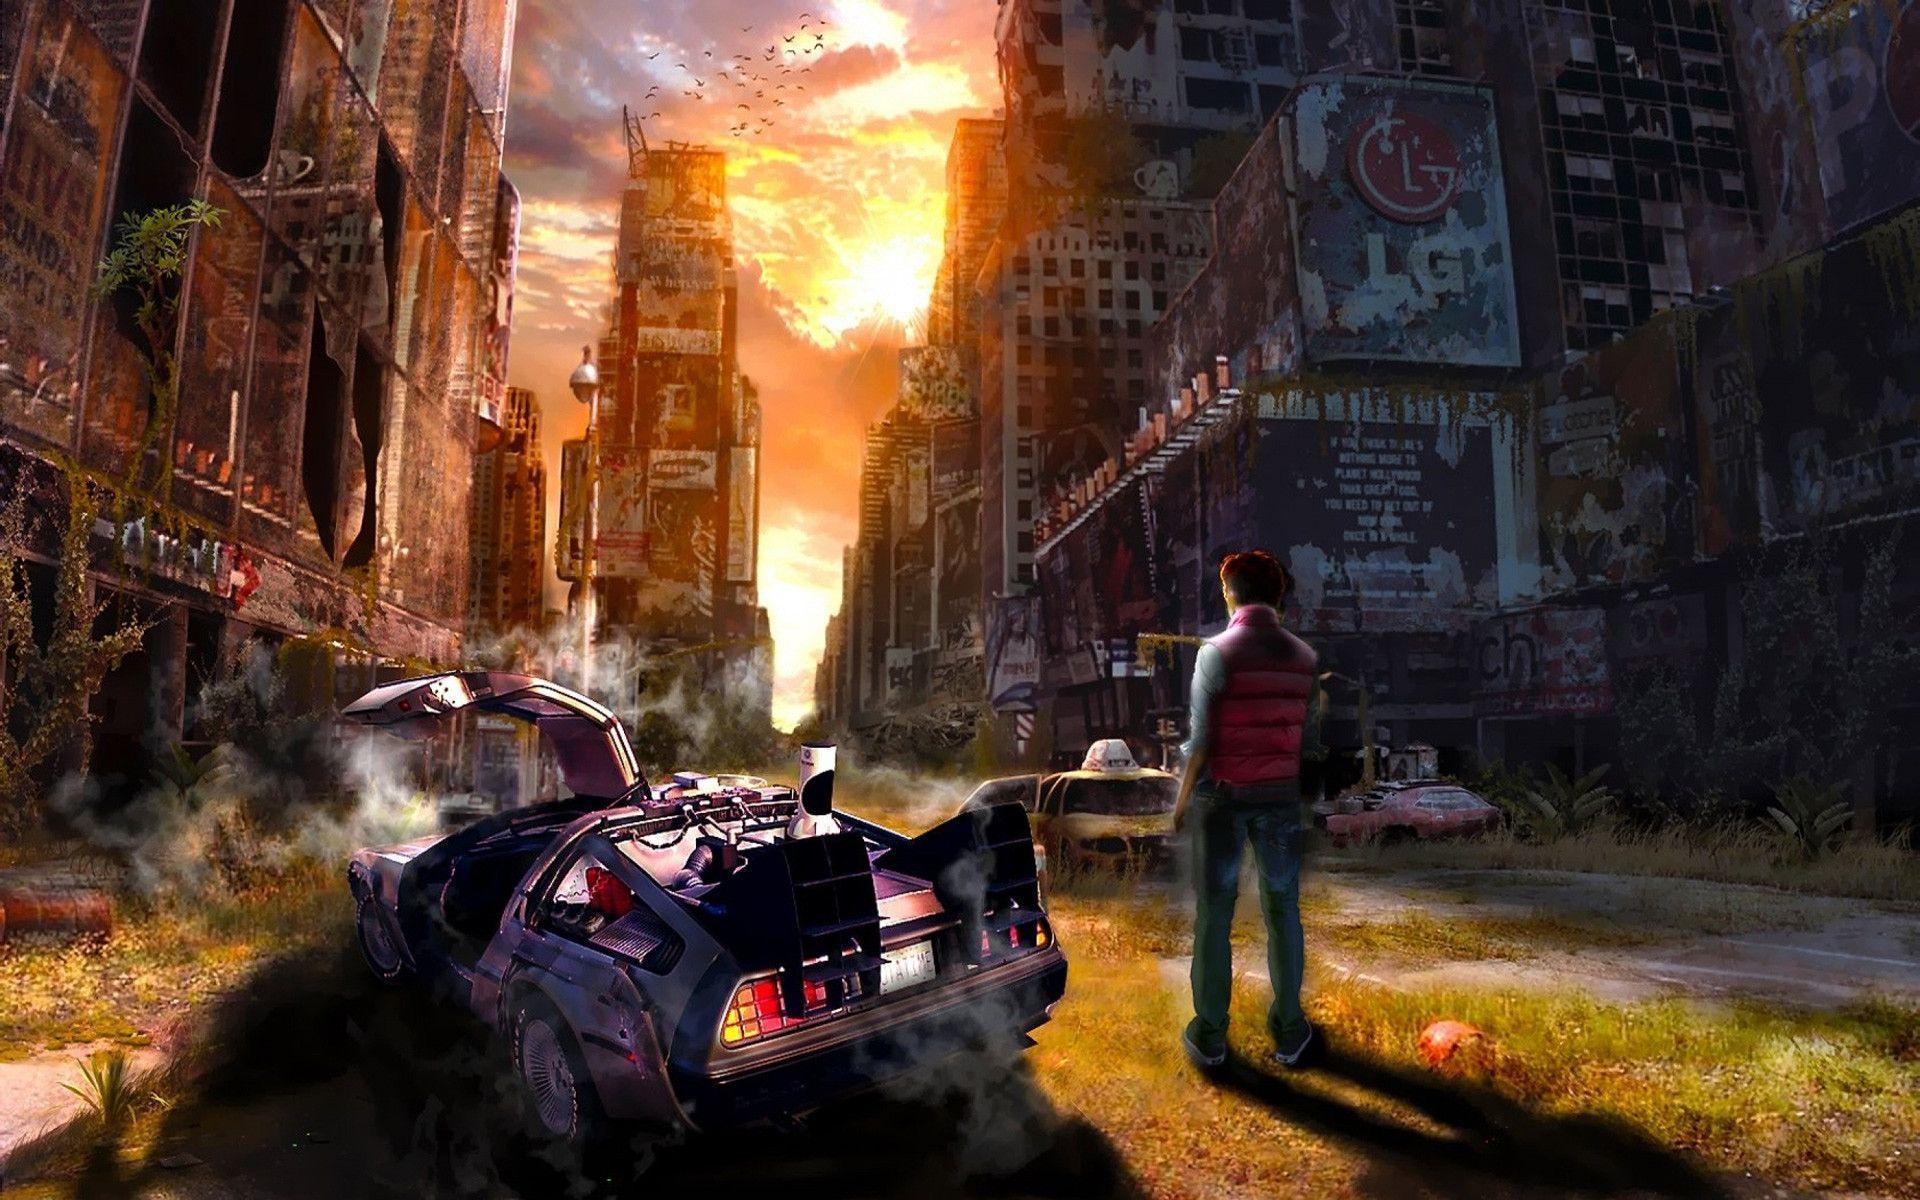 image For > 2012 End Of The World Movie Wallpaper